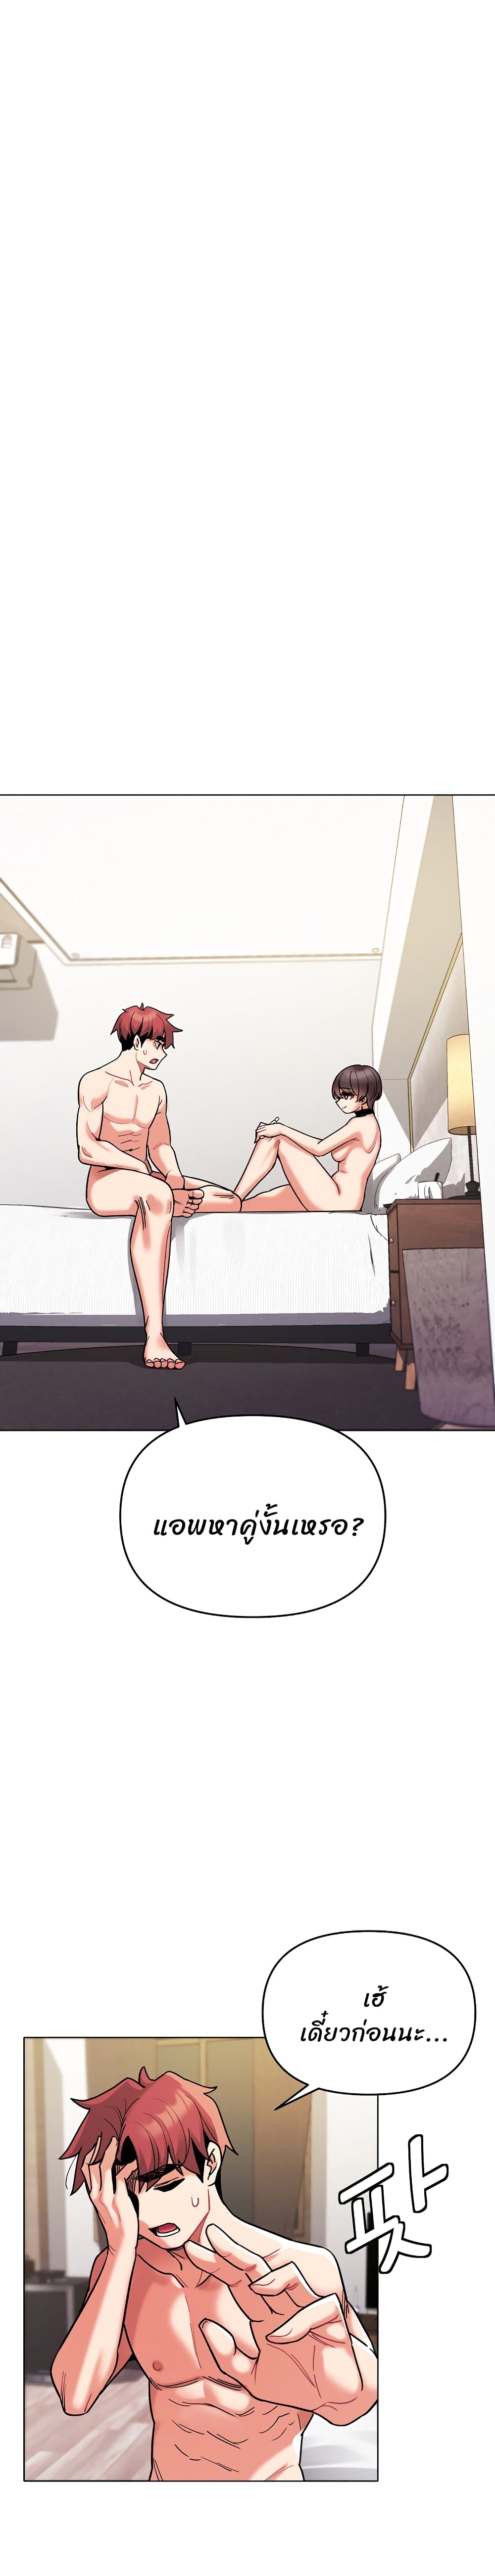 College Life Starts With Clubs 49 ภาพที่ 1